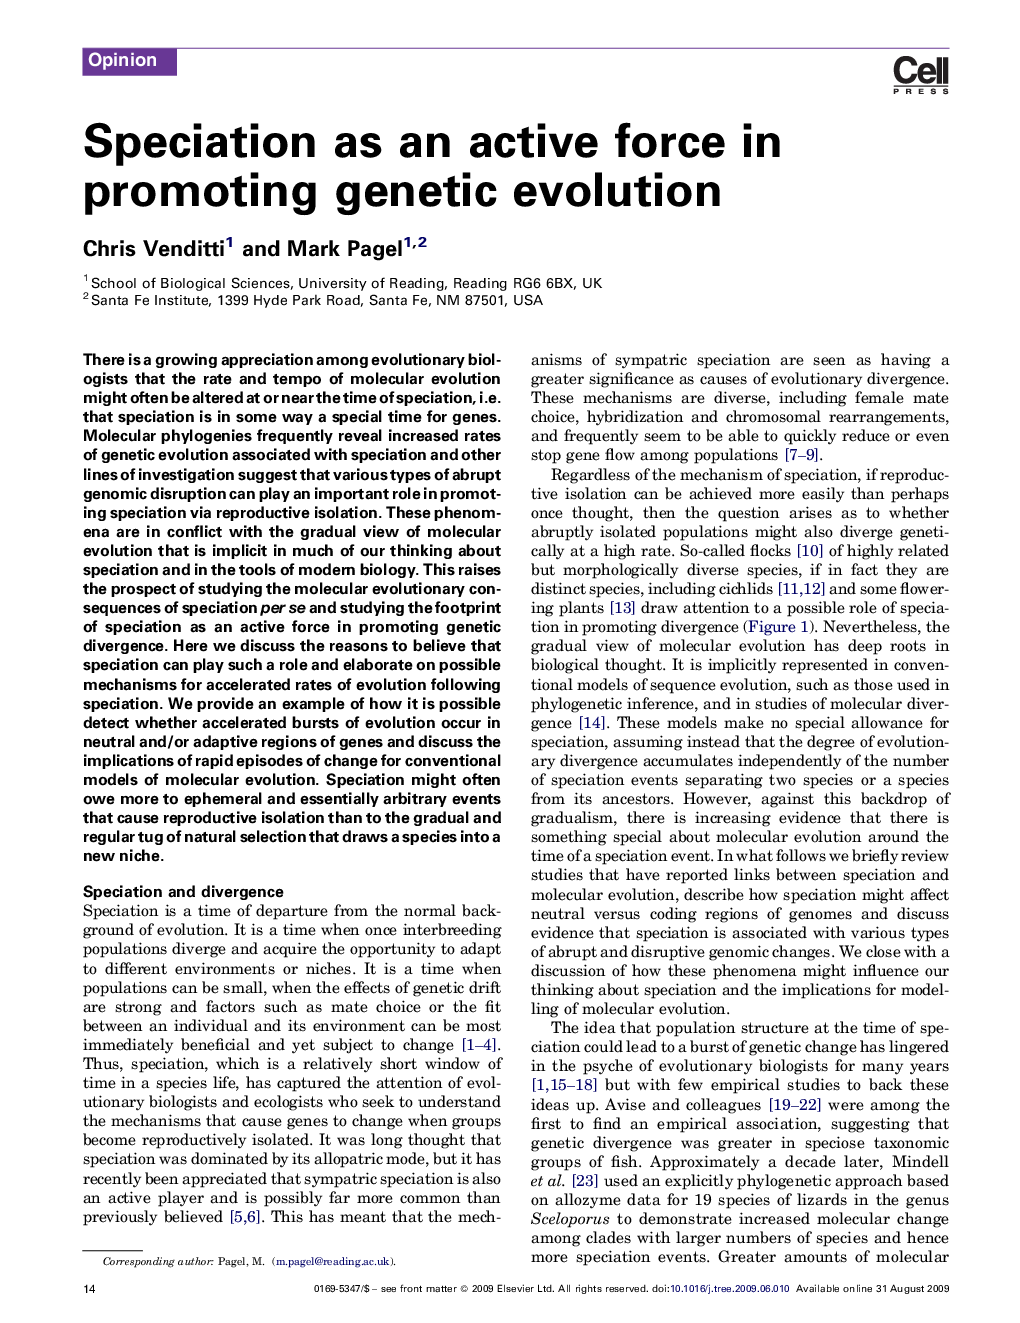 Speciation as an active force in promoting genetic evolution